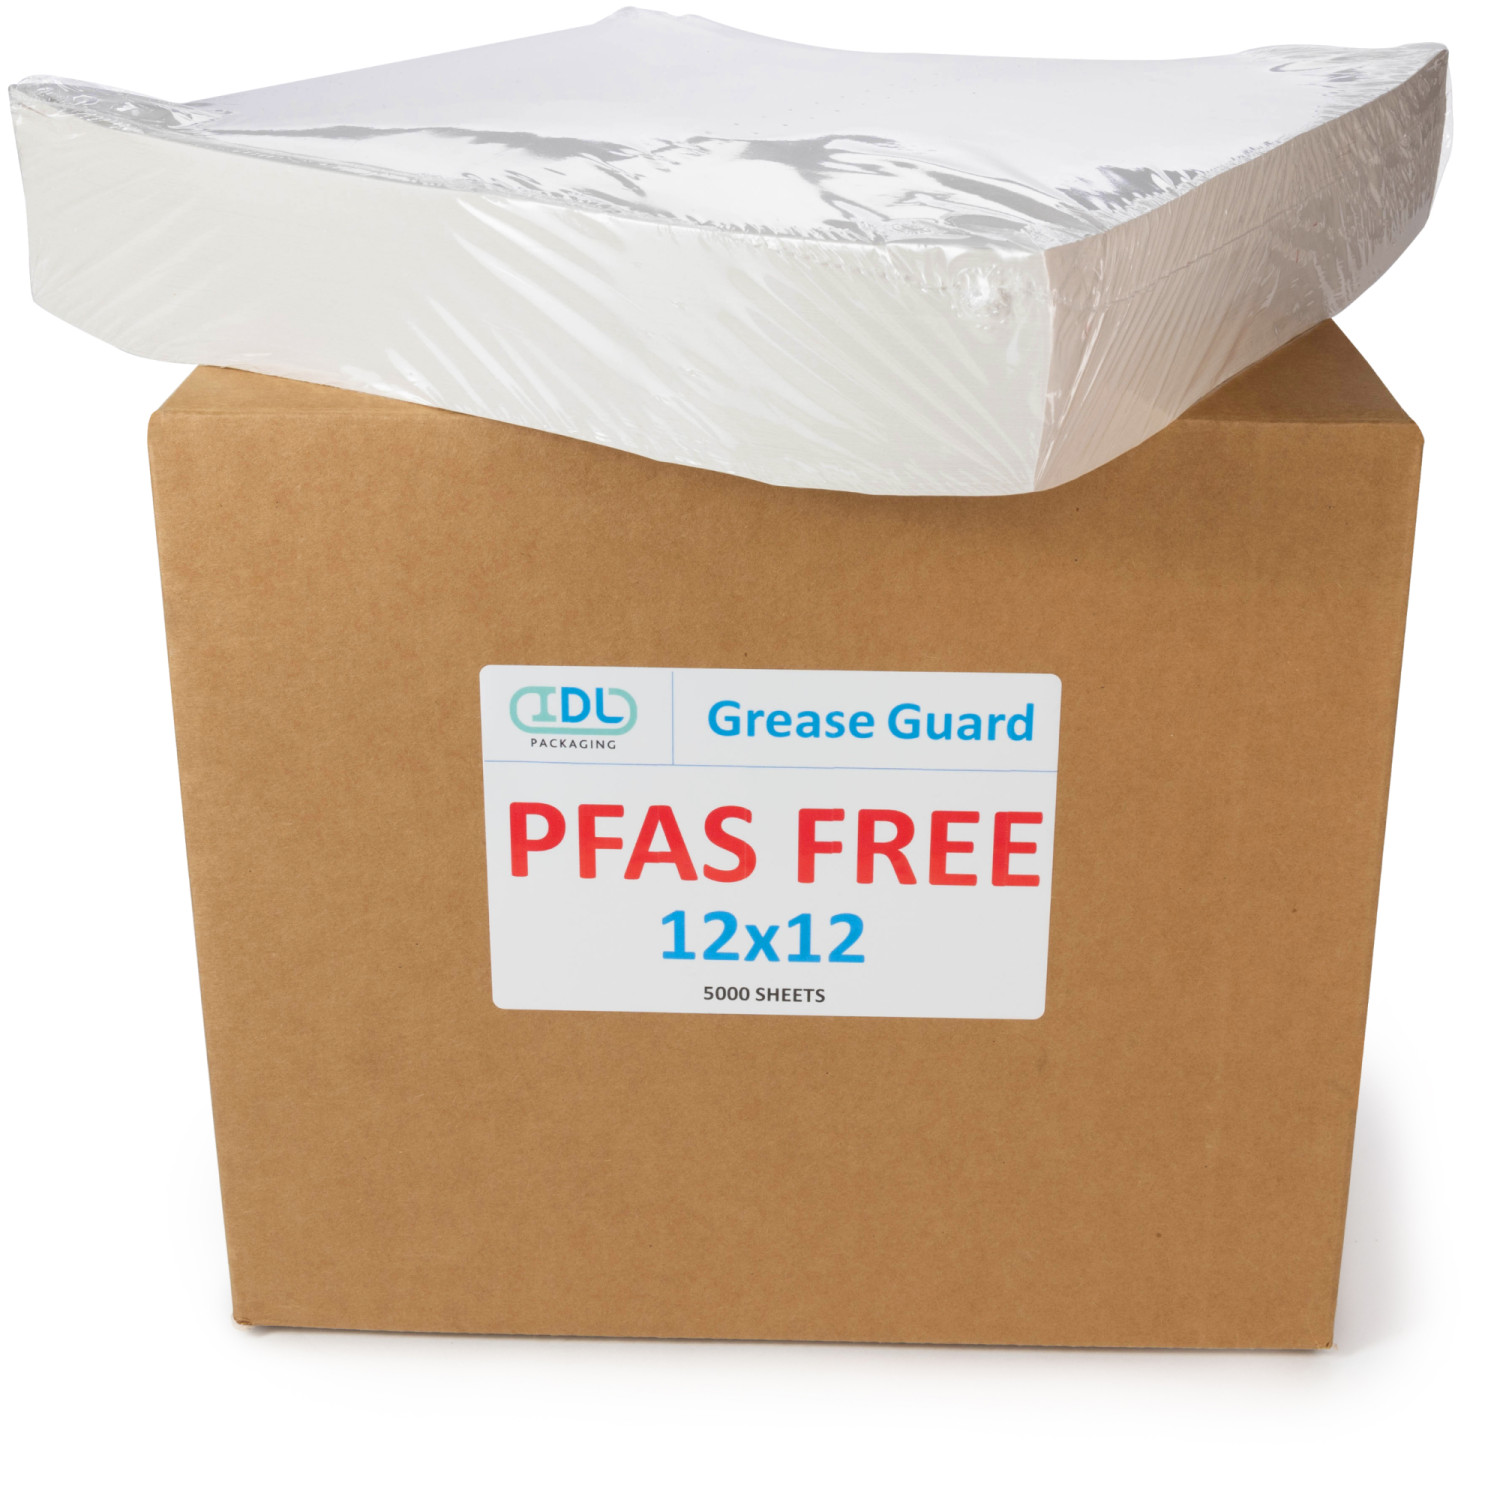 12 x 12 PFAS-Free, Grease-Proof Paper Sheets, White buy in stock